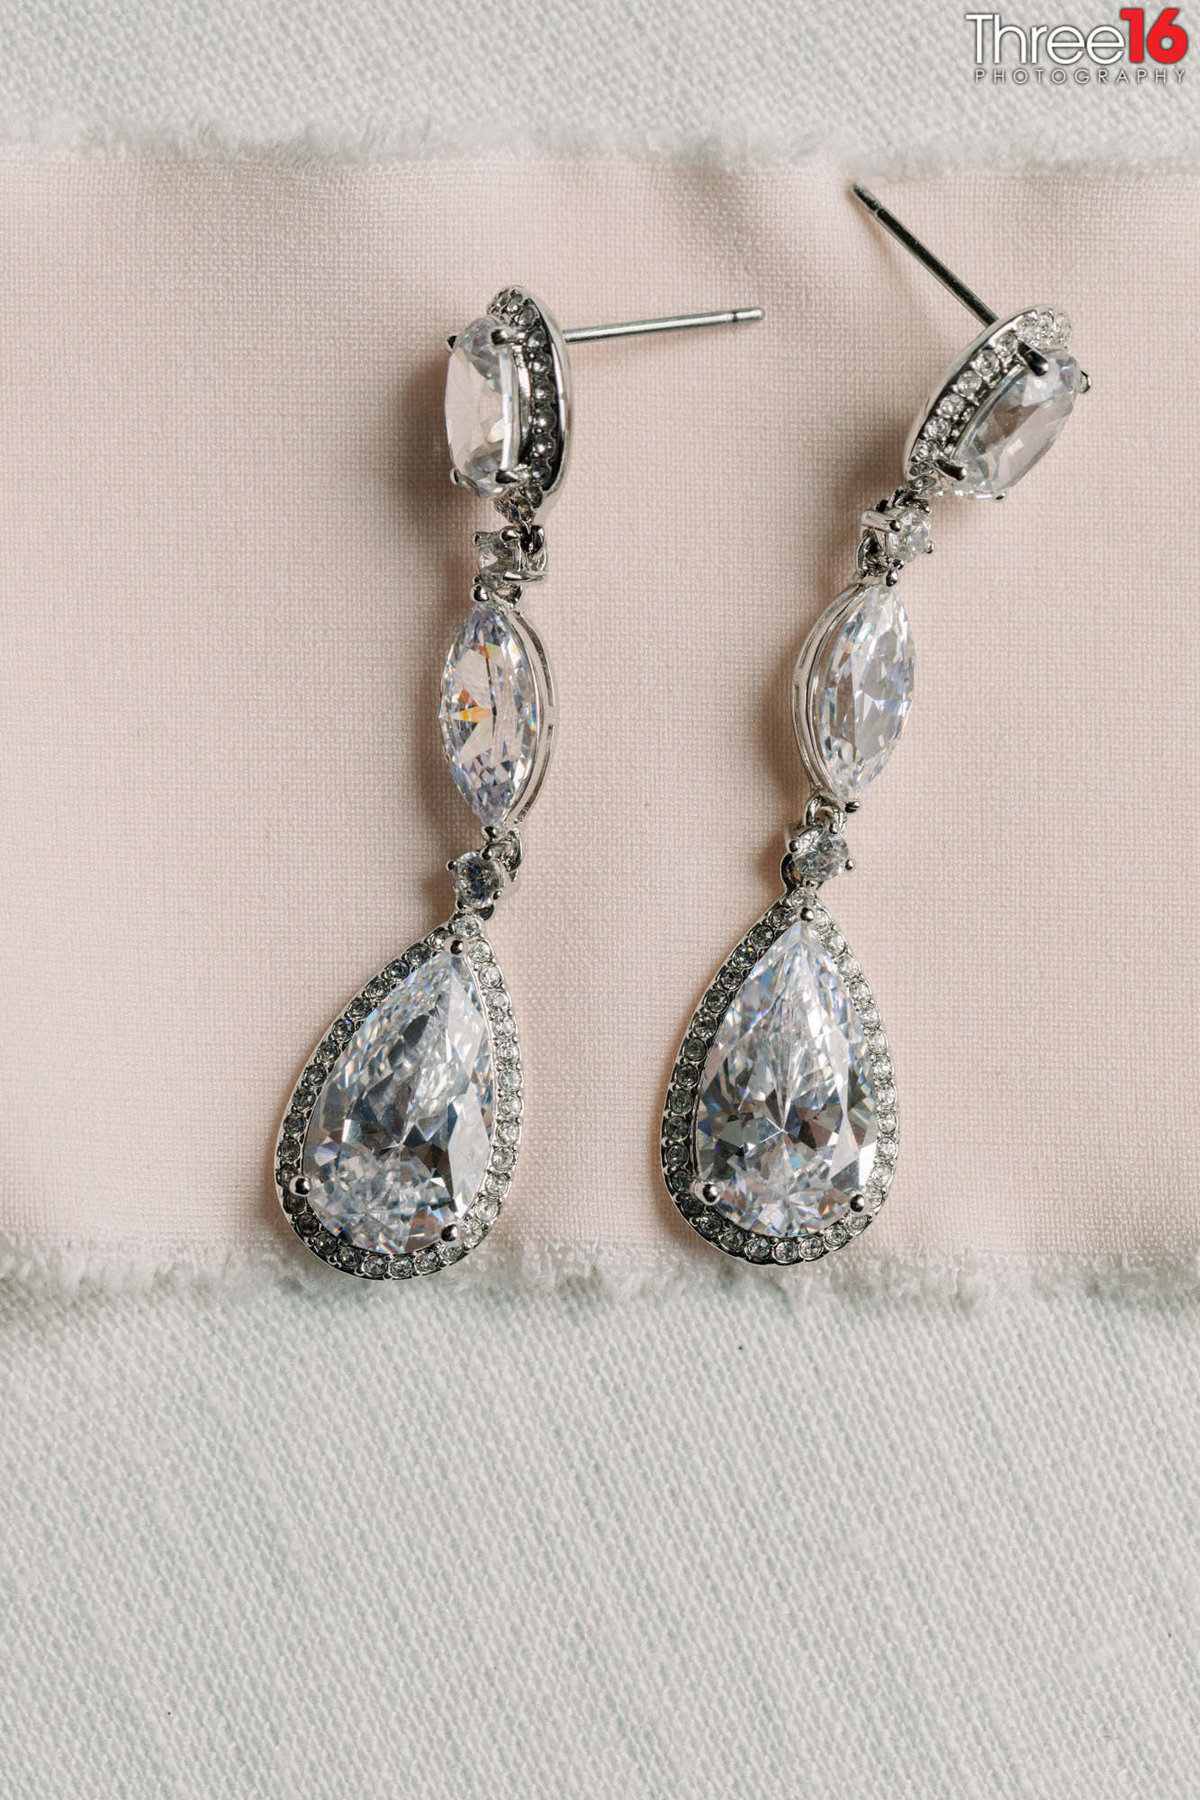 Brides beautiful ceremony earrings